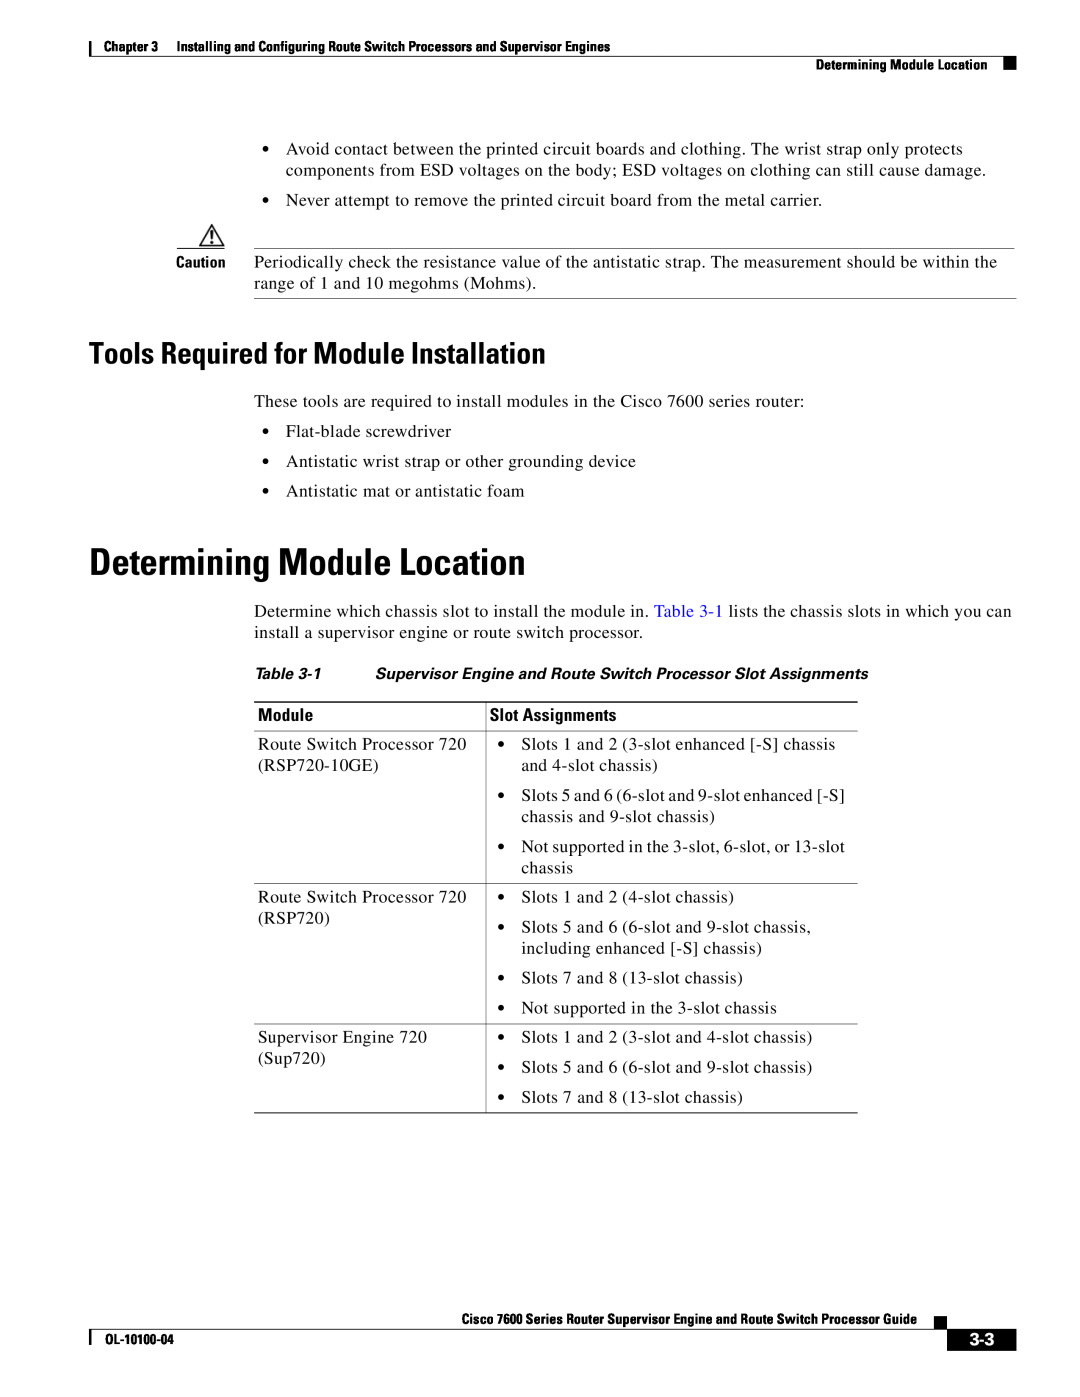 Cisco Systems 7600 manual Determining Module Location, Tools Required for Module Installation 